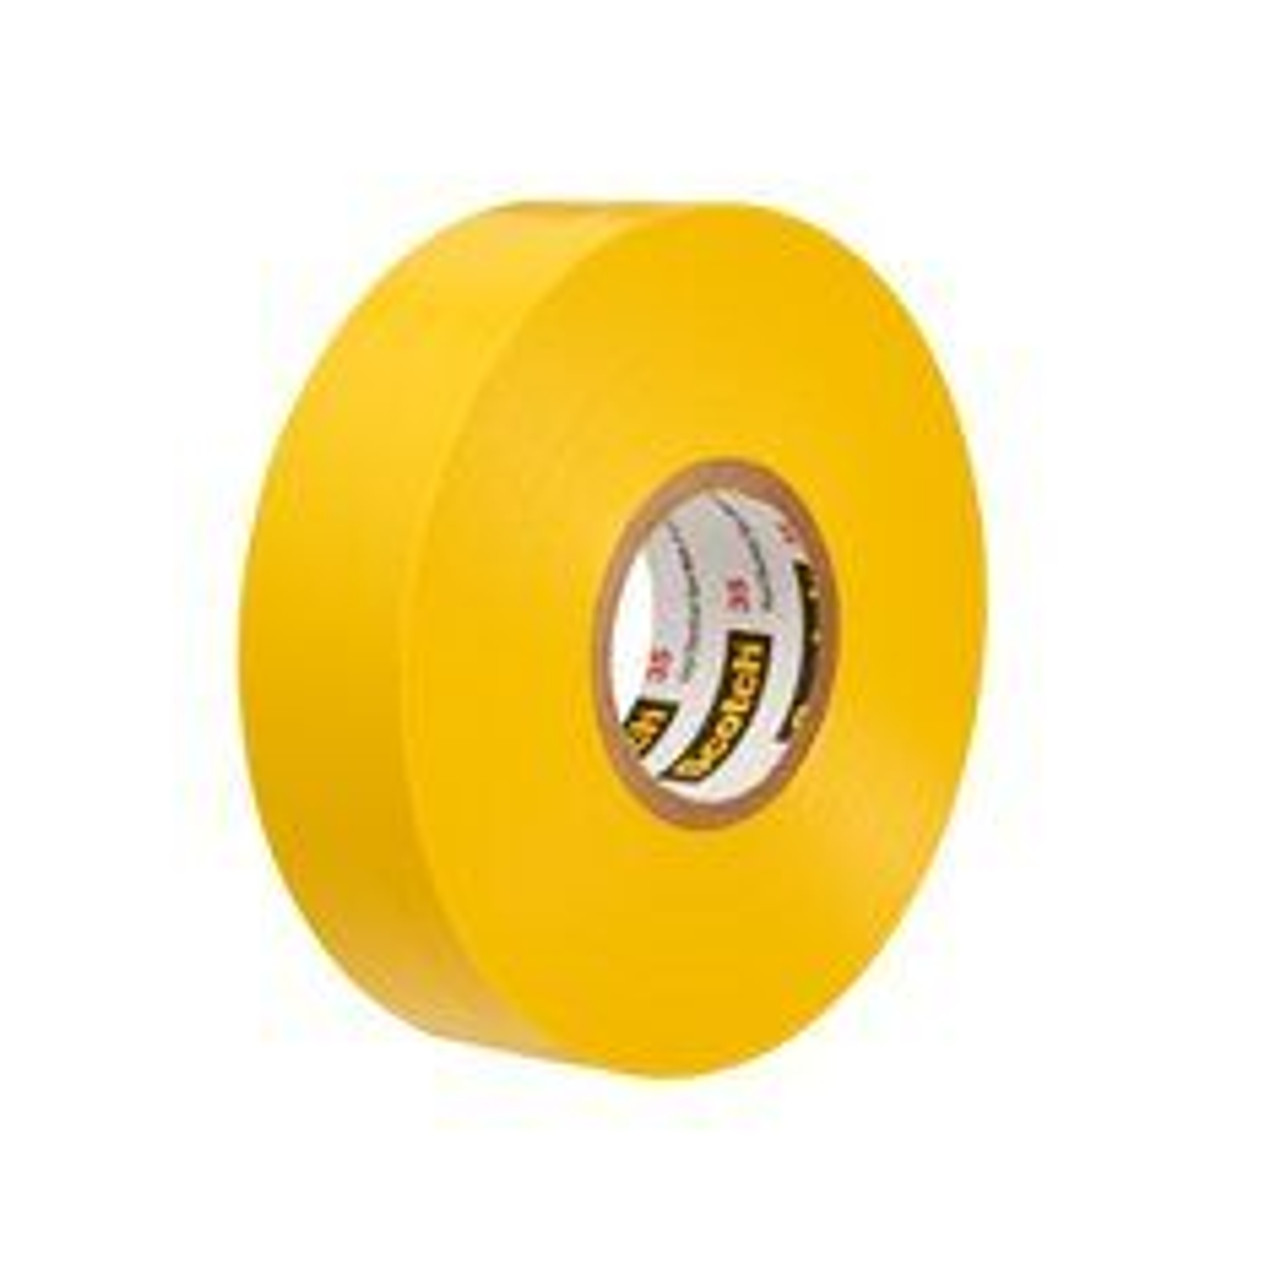 White 1/2 in x 20 ft 3M 35 Scotch Vinyl Electrical Color Coding Tape 